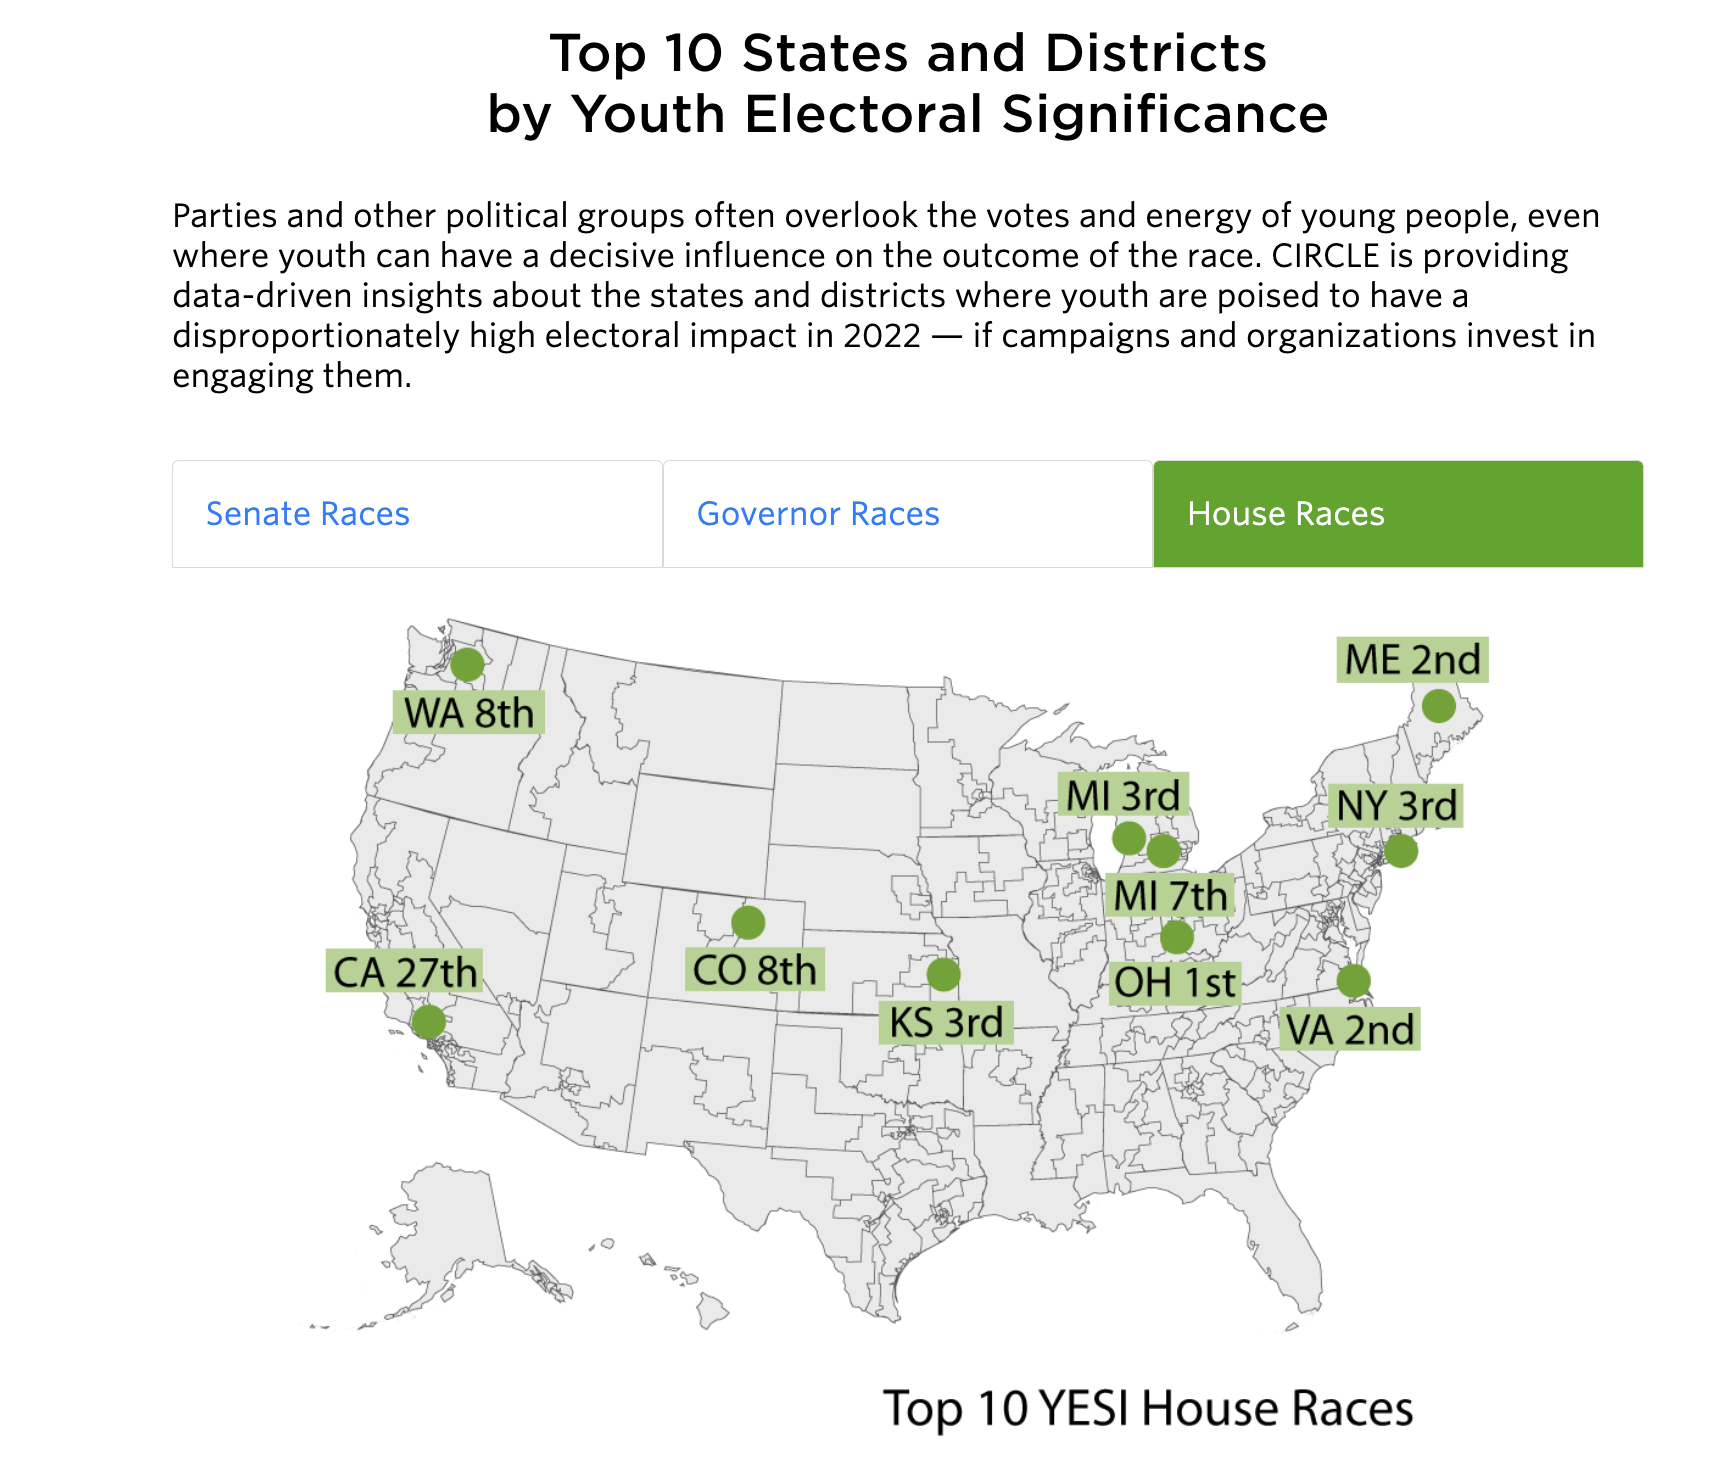 Data by Center for Information and Research on Civic Learning & Engagement (CIRCLE) shows insights on youth electoral significance. Kansas was among the top 10 states and districts for young people engagement in a house race. (Screenshot)